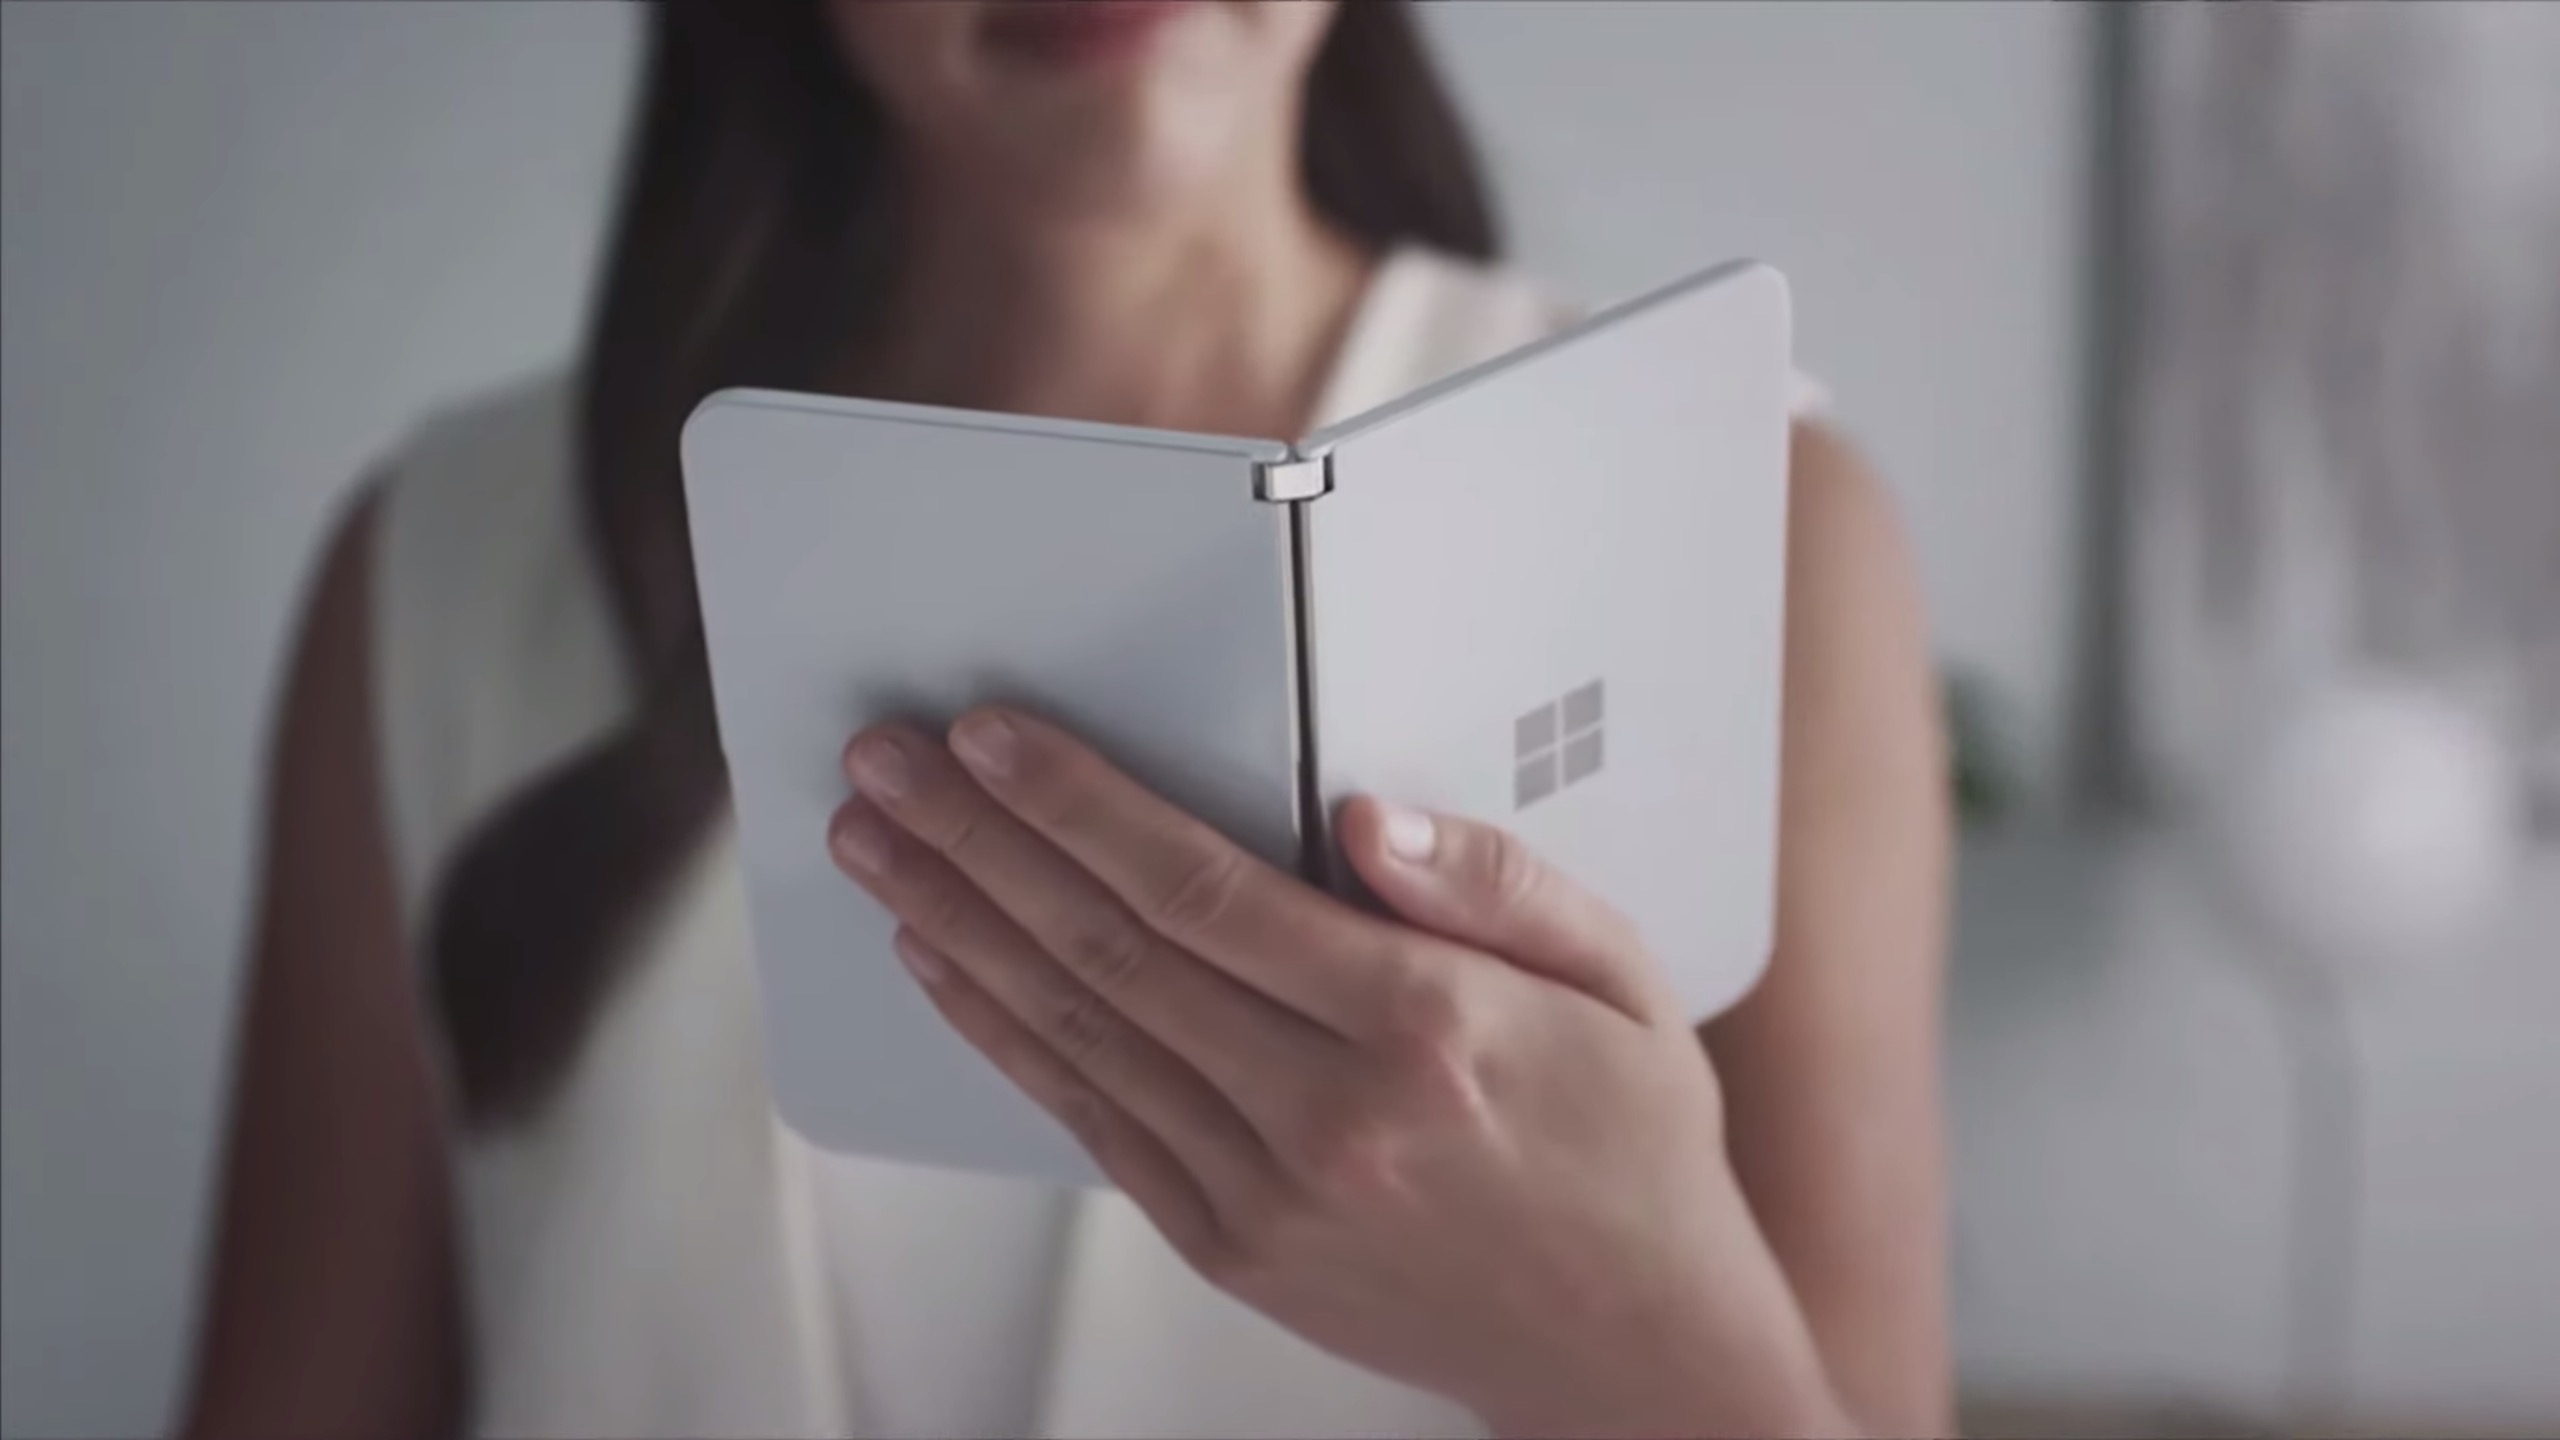 「Surface Duo」の画像検索結果